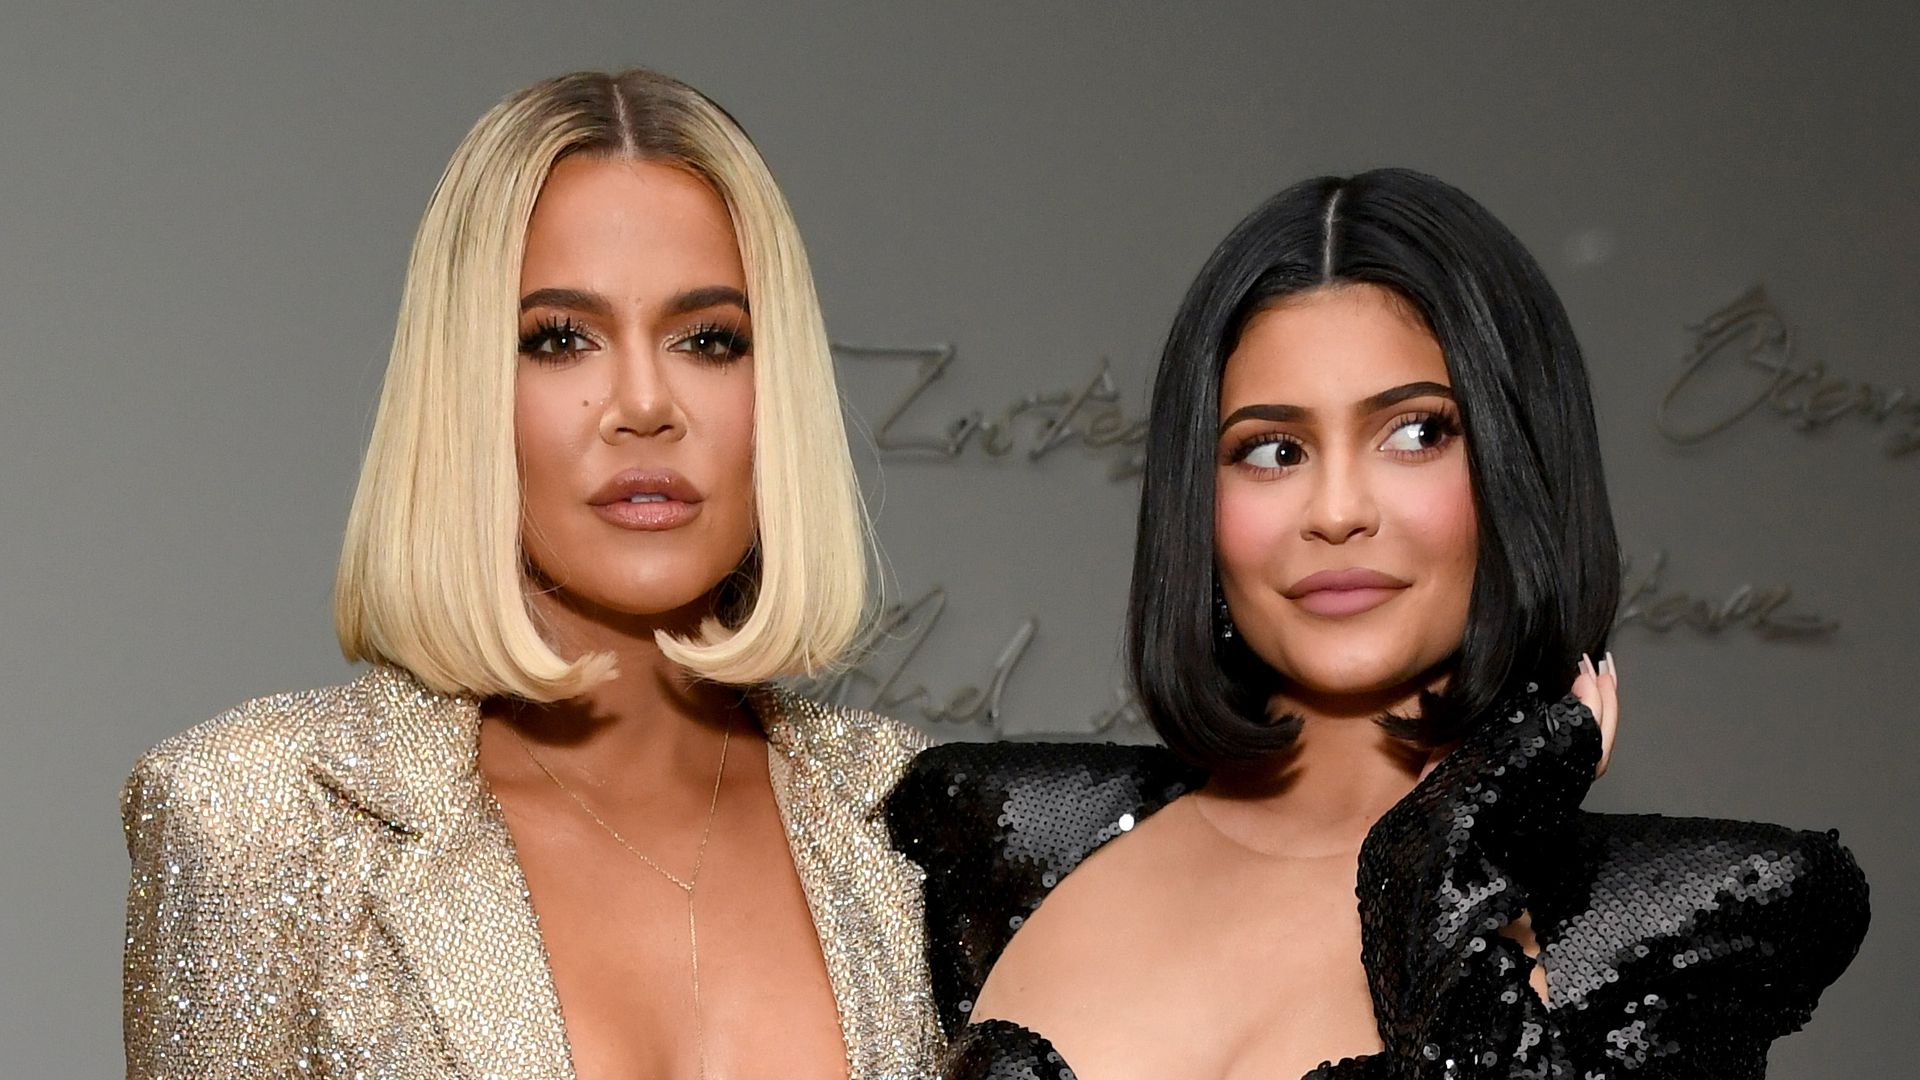 Khloe Kardashian and Kylie Jenner attend Sean Combs 50th Birthday Bash presented by Ciroc Vodka on December 14, 2019 in Los Angeles, California